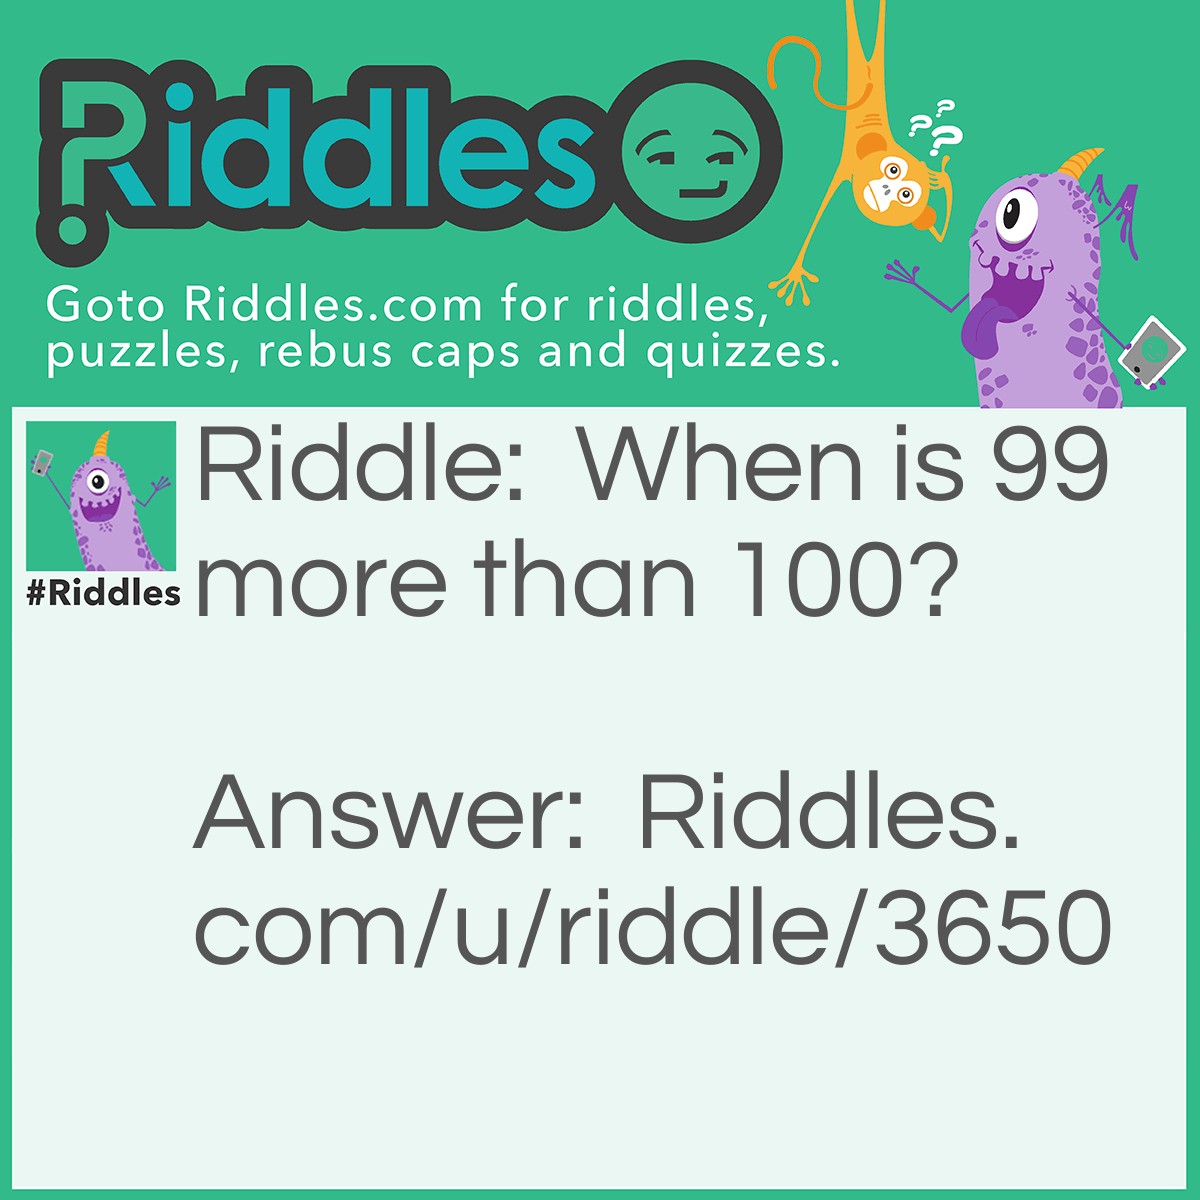 Riddle: When is 99 more than 100? Answer: When you type them on a microwave 0:99 on a microwave is 99 seconds 1:00 on a microwave is 1 minute or 60 seconds.